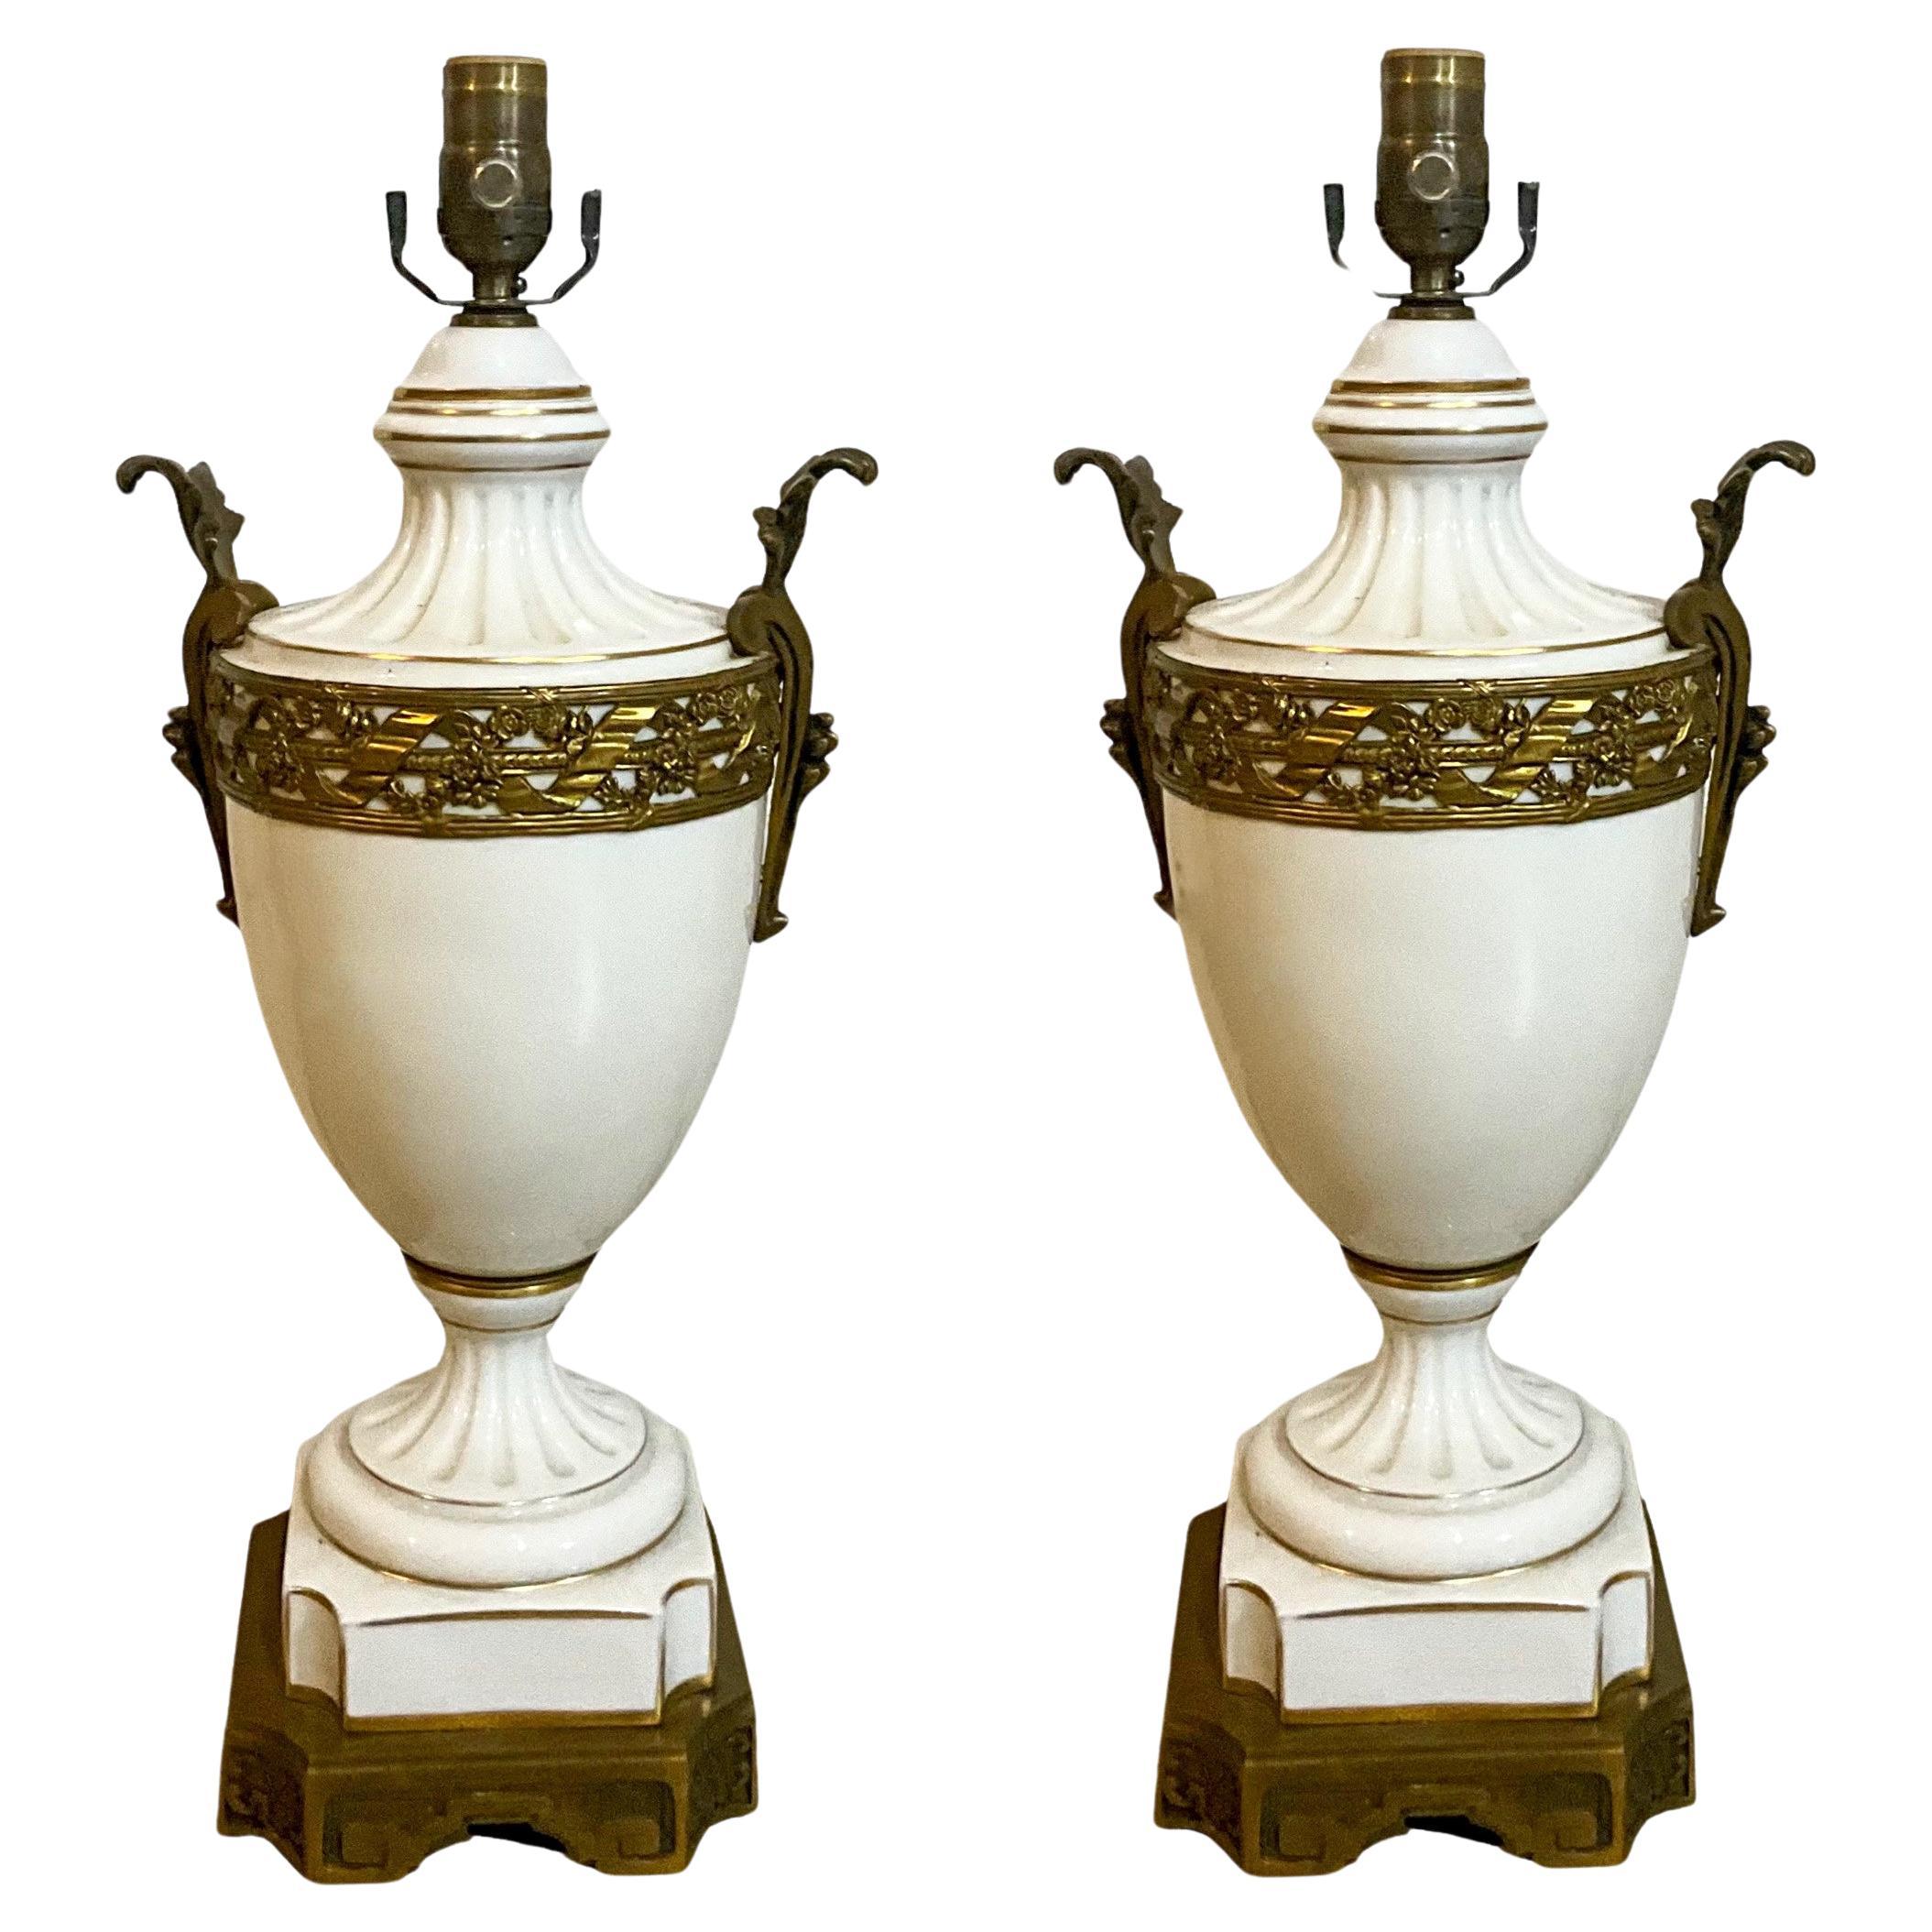 19th-C. French Neo-Classical Style Porcelain & Gilt Bronze Table Lamps - Pair For Sale